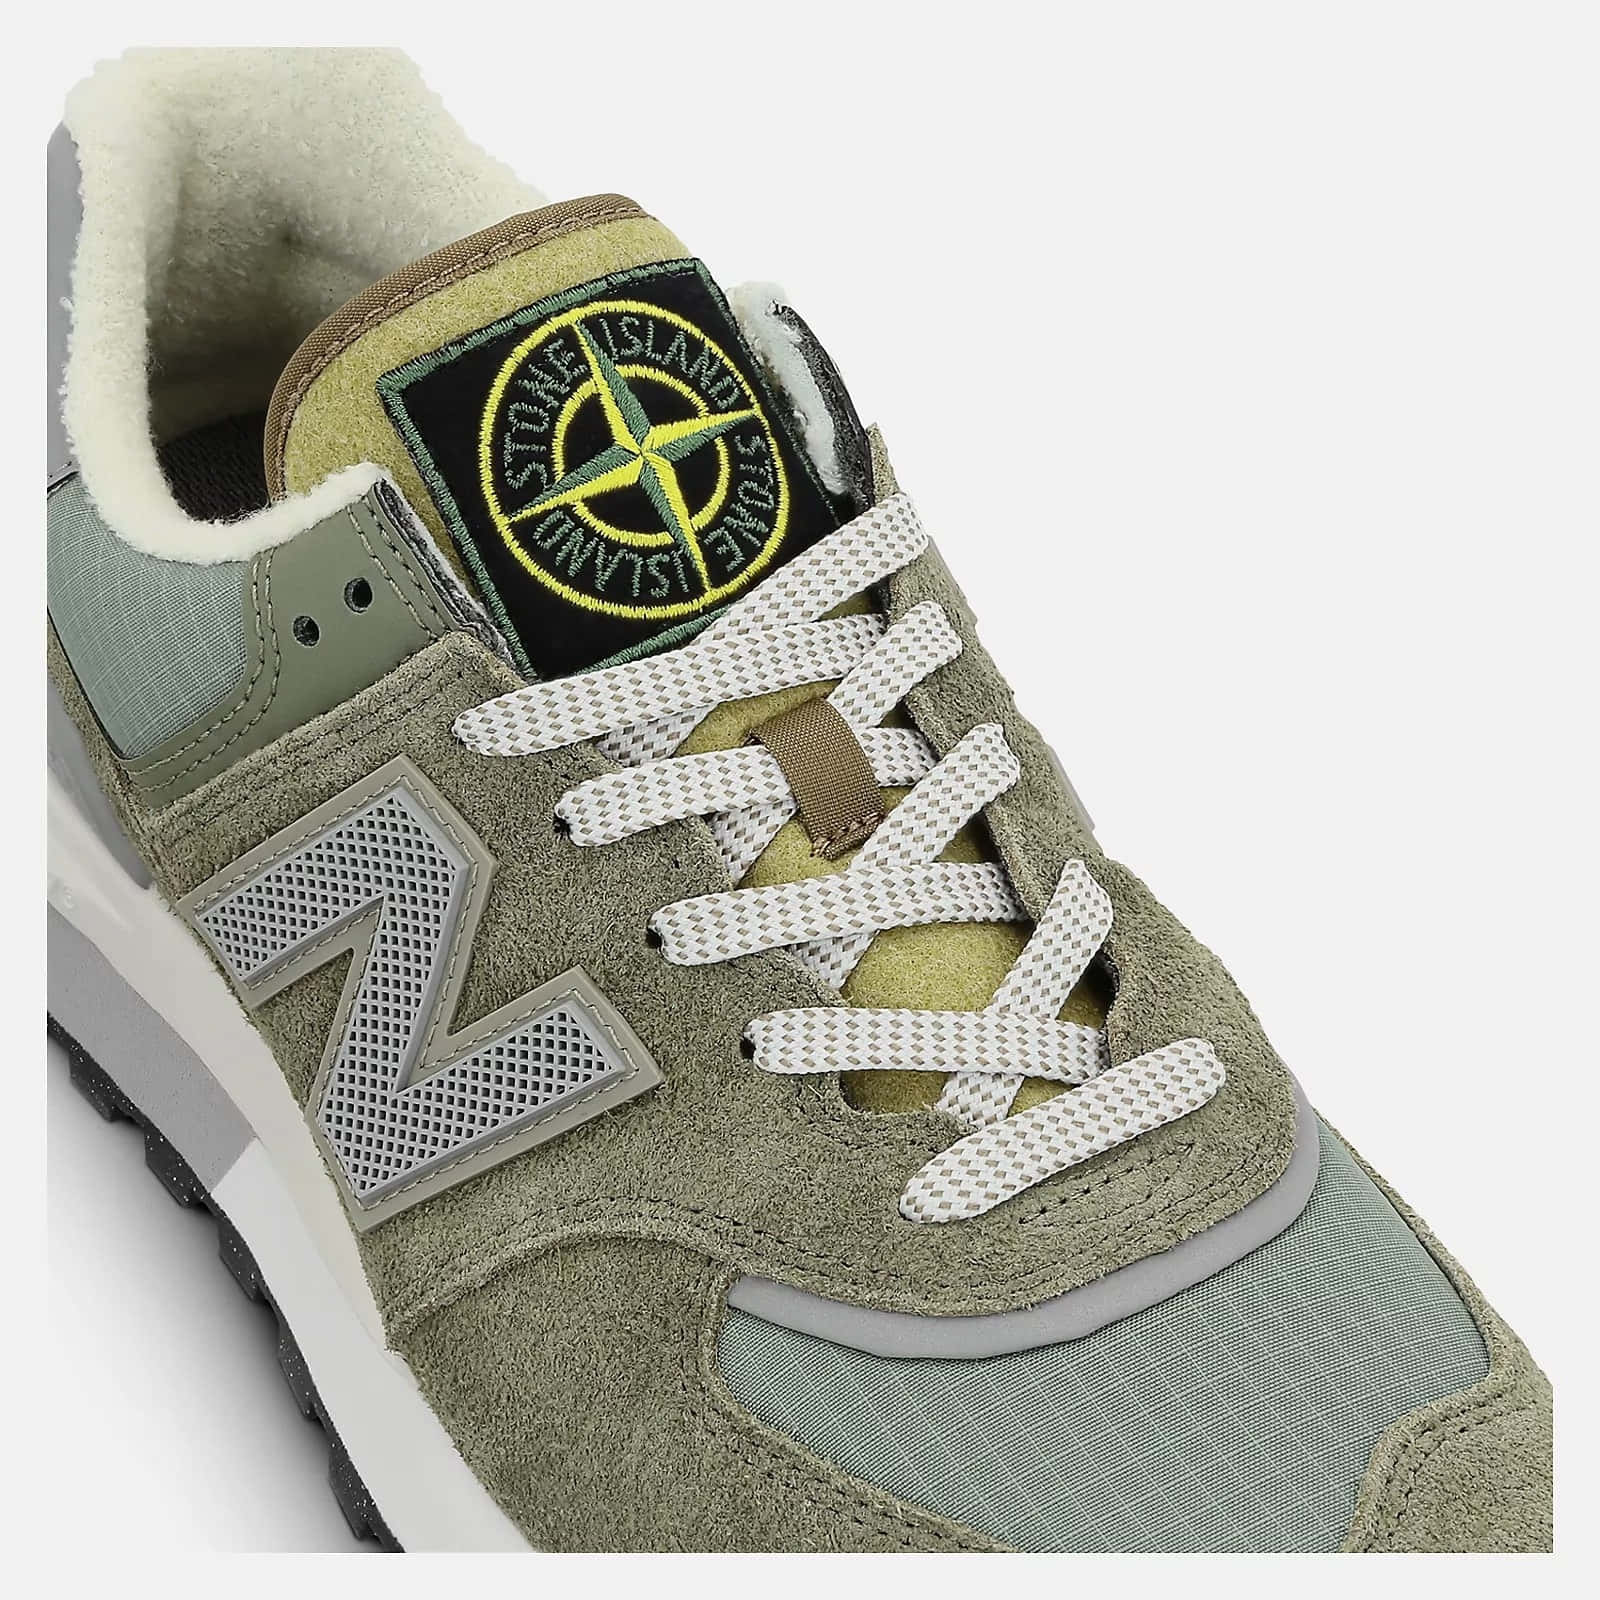 New Balance 997 Sneakers In Grey And Yellow